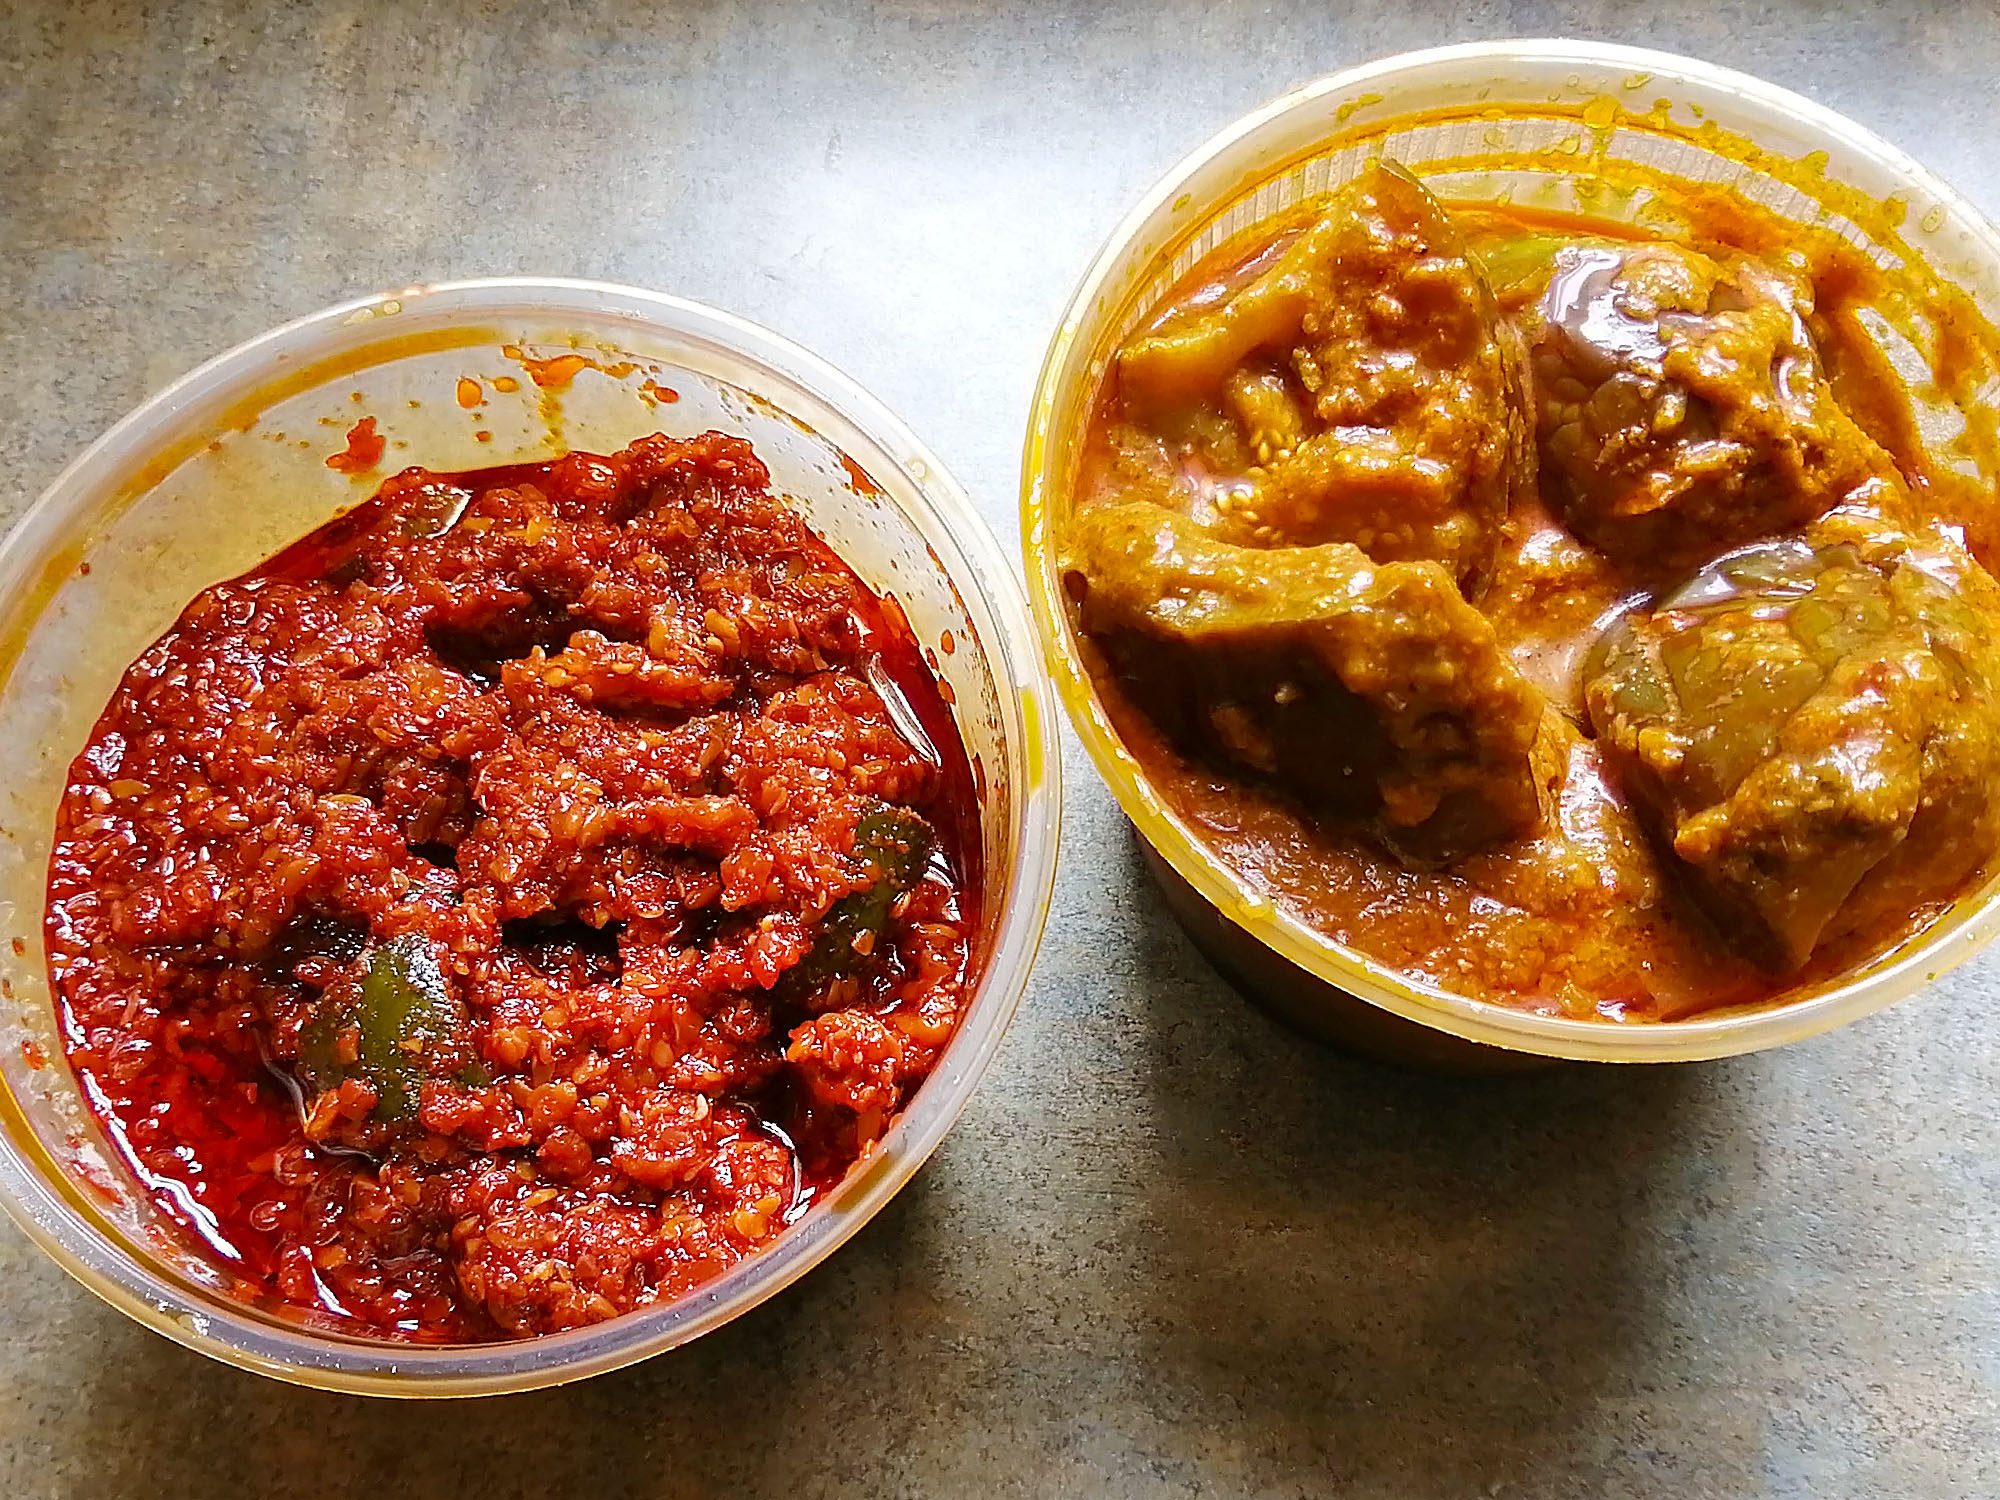 Two plastic to-go containers without lids revealing their contents; the left container has a reddish â€œmango pickleâ€ chutney in it, the right container has a yellowish â€œeggplant curryâ€ in it. Photo by Paul Young.